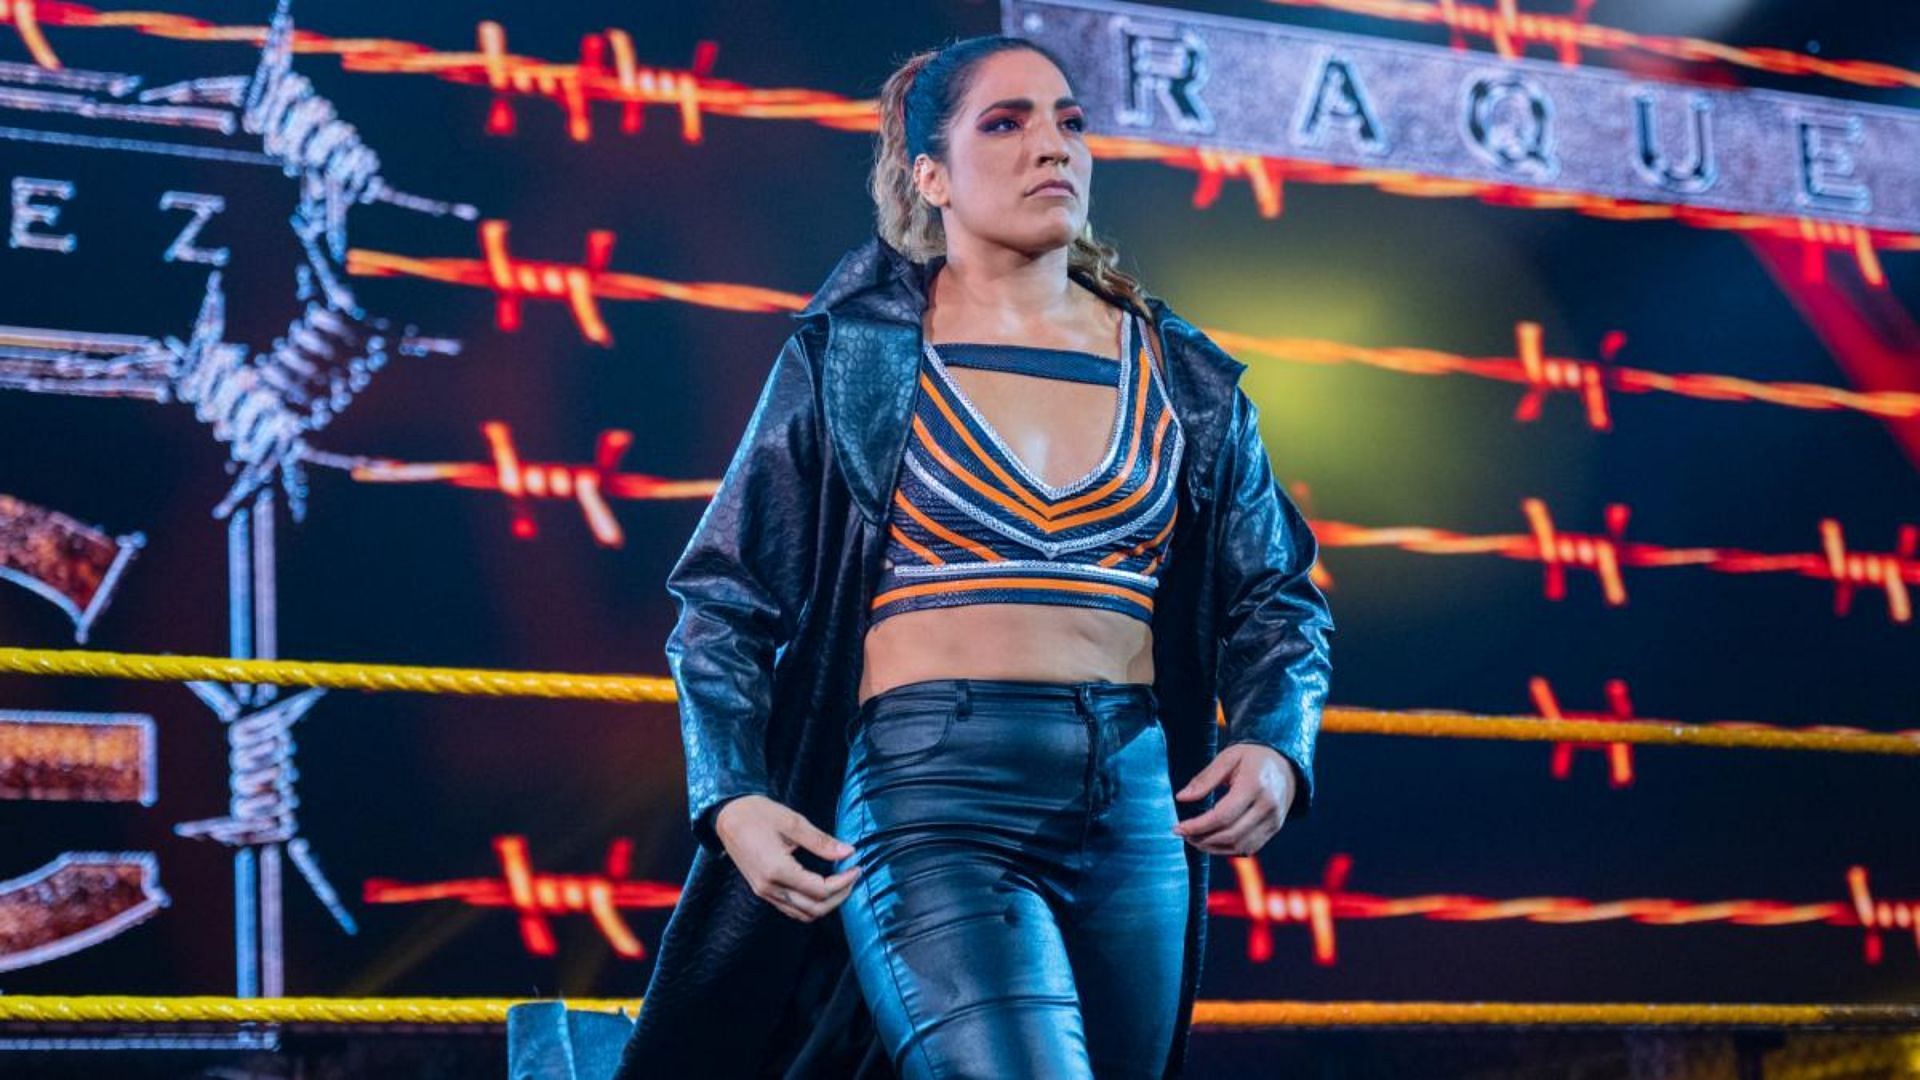 Raquel Rodriguez has left NXT after a successful run on the brand.